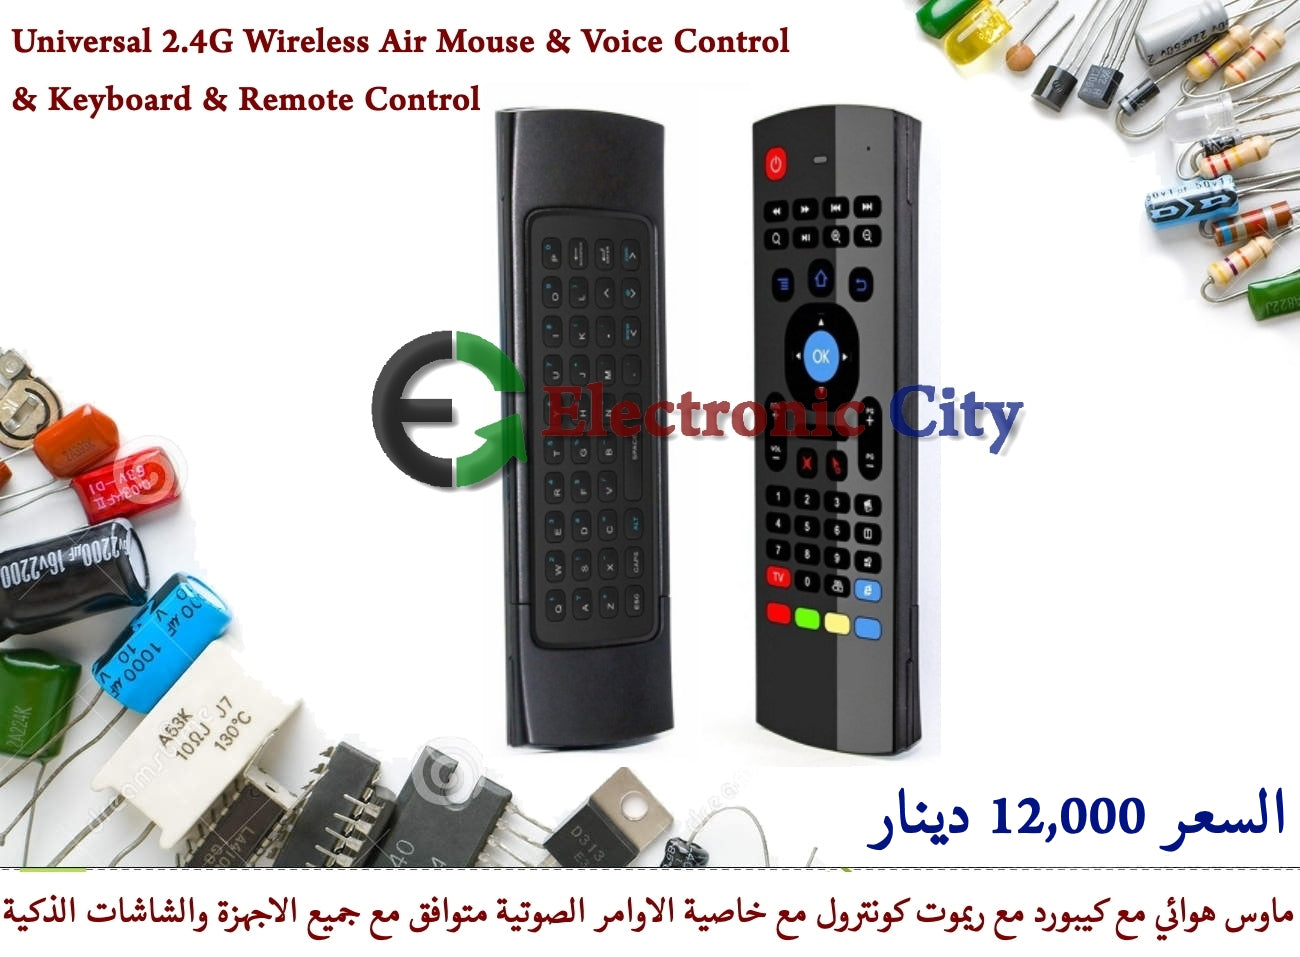 Universal 2.4G Wireless Air Mouse & Voice Control & Keyboard & Remote Control